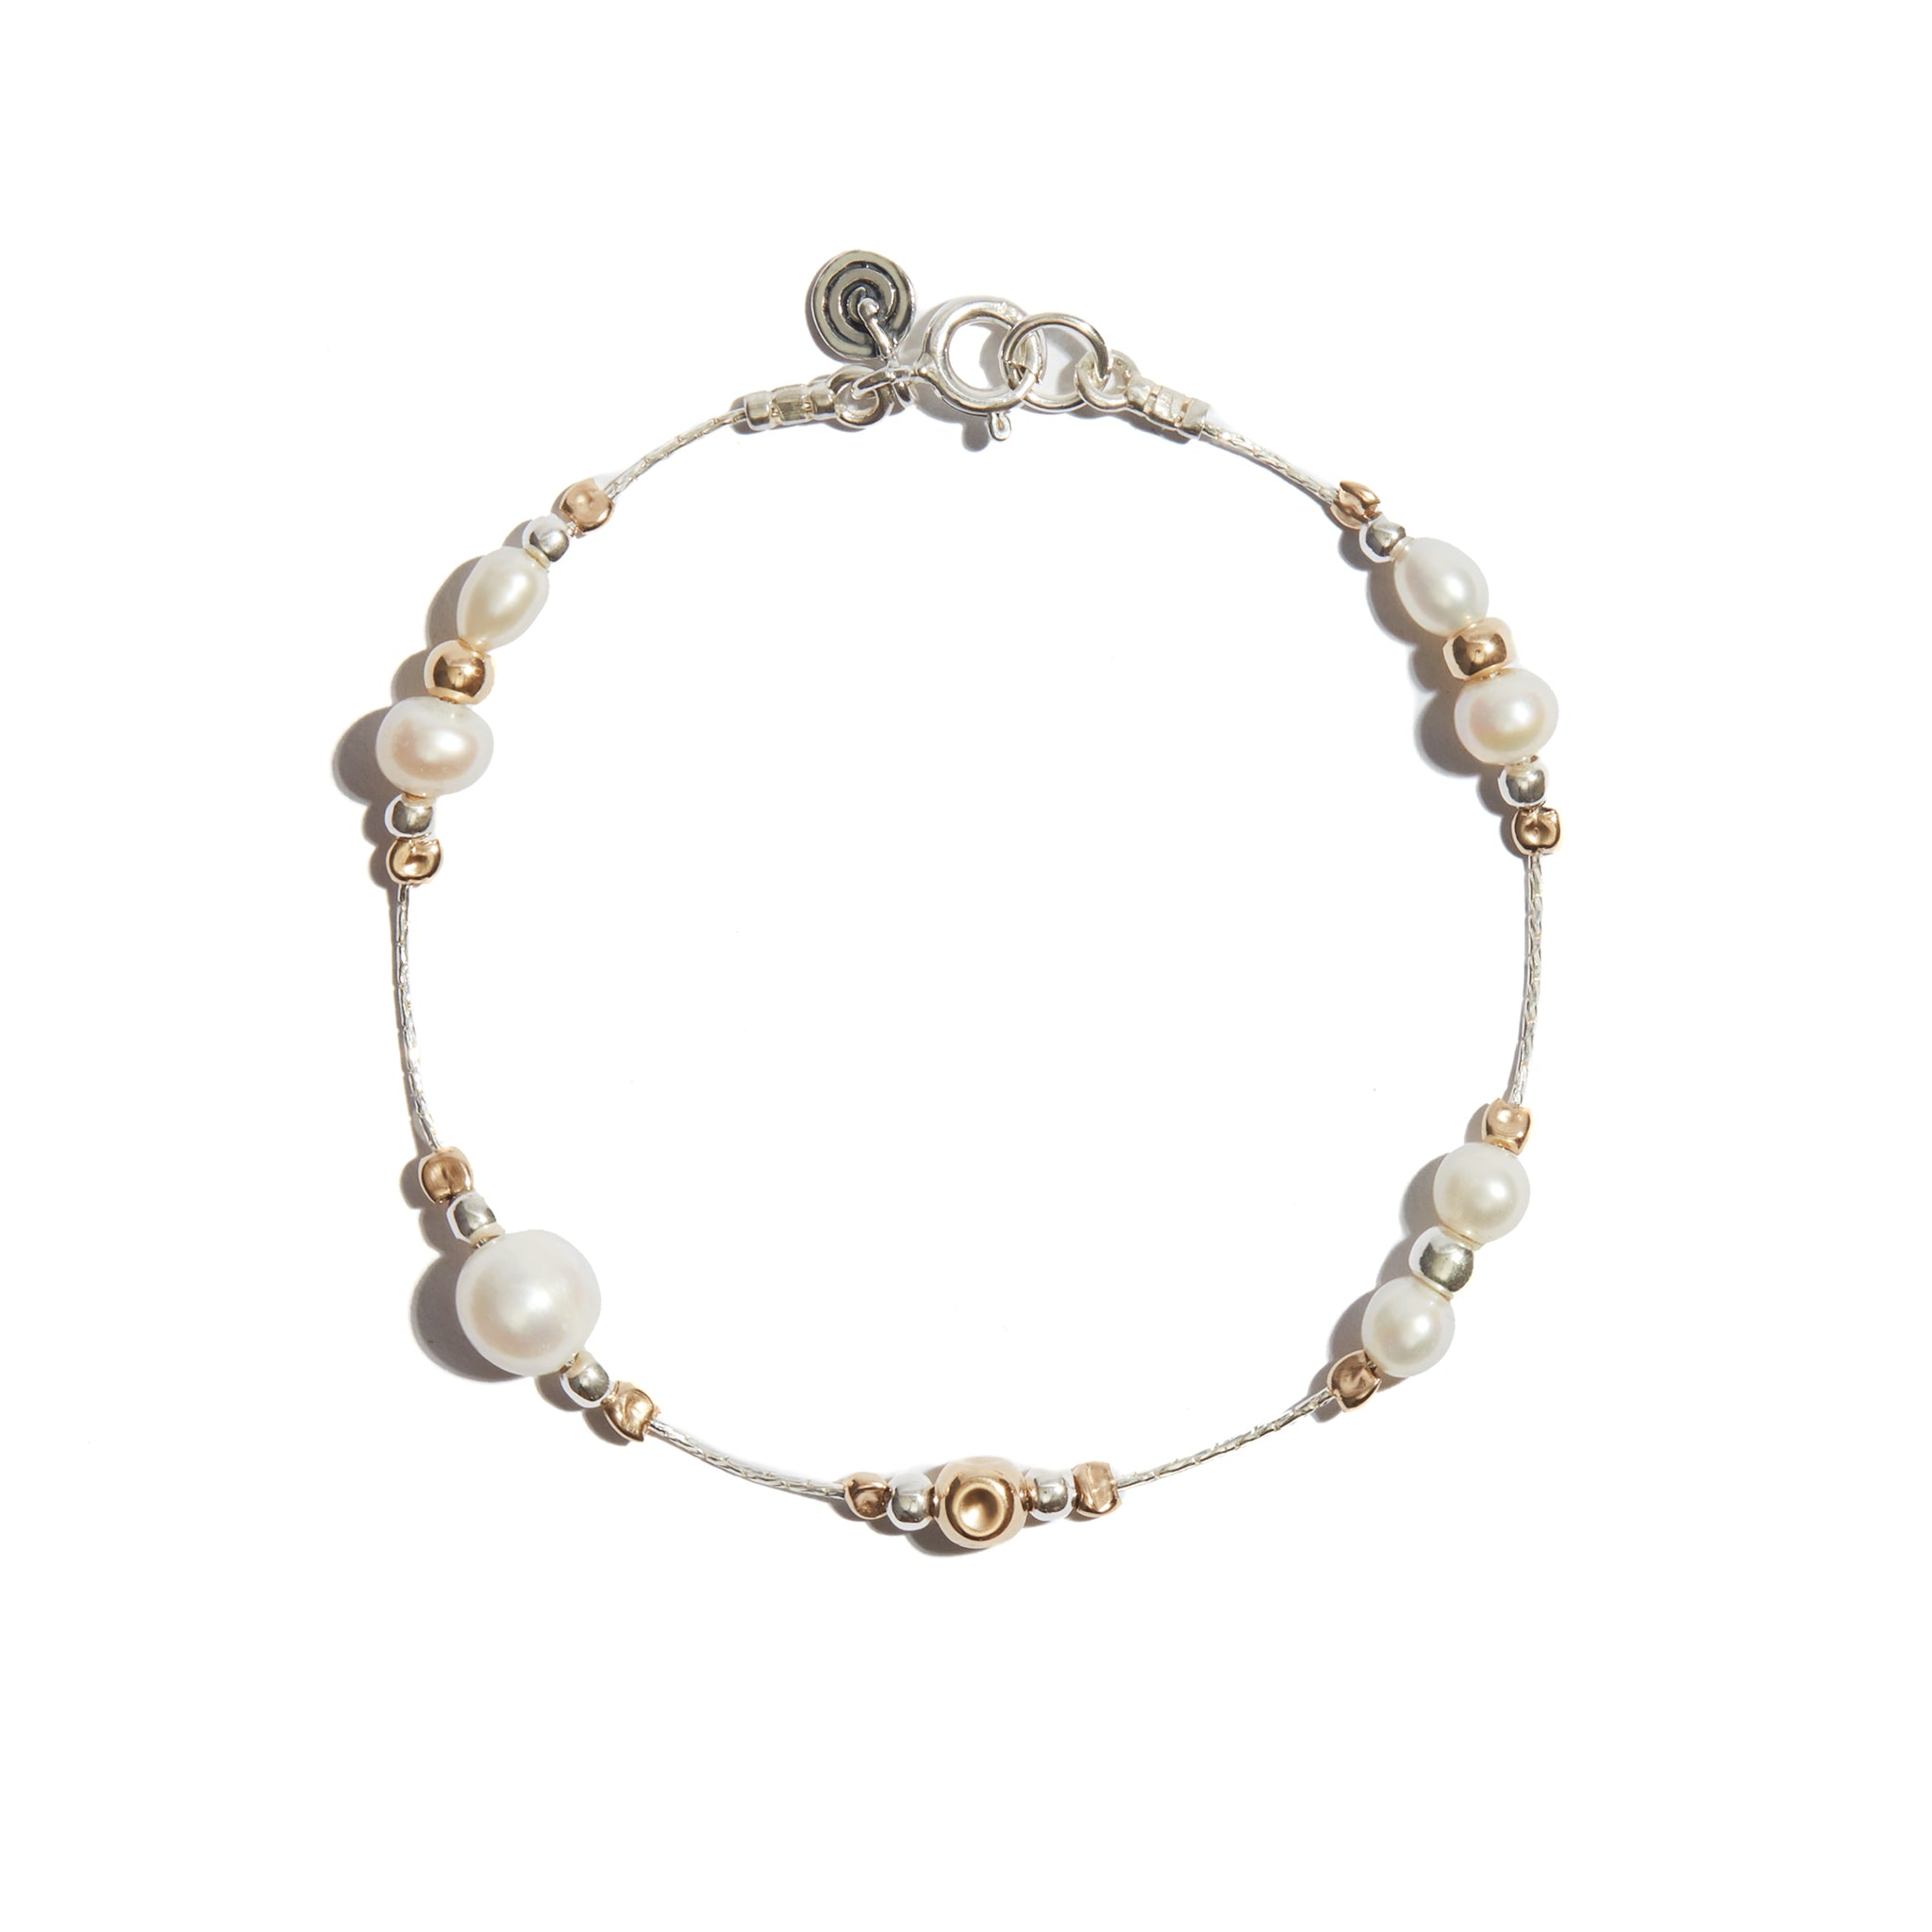 Our delicate pearl bracelet is made from 14ct gold fill and sterling silver. The perfect gift for someone special.